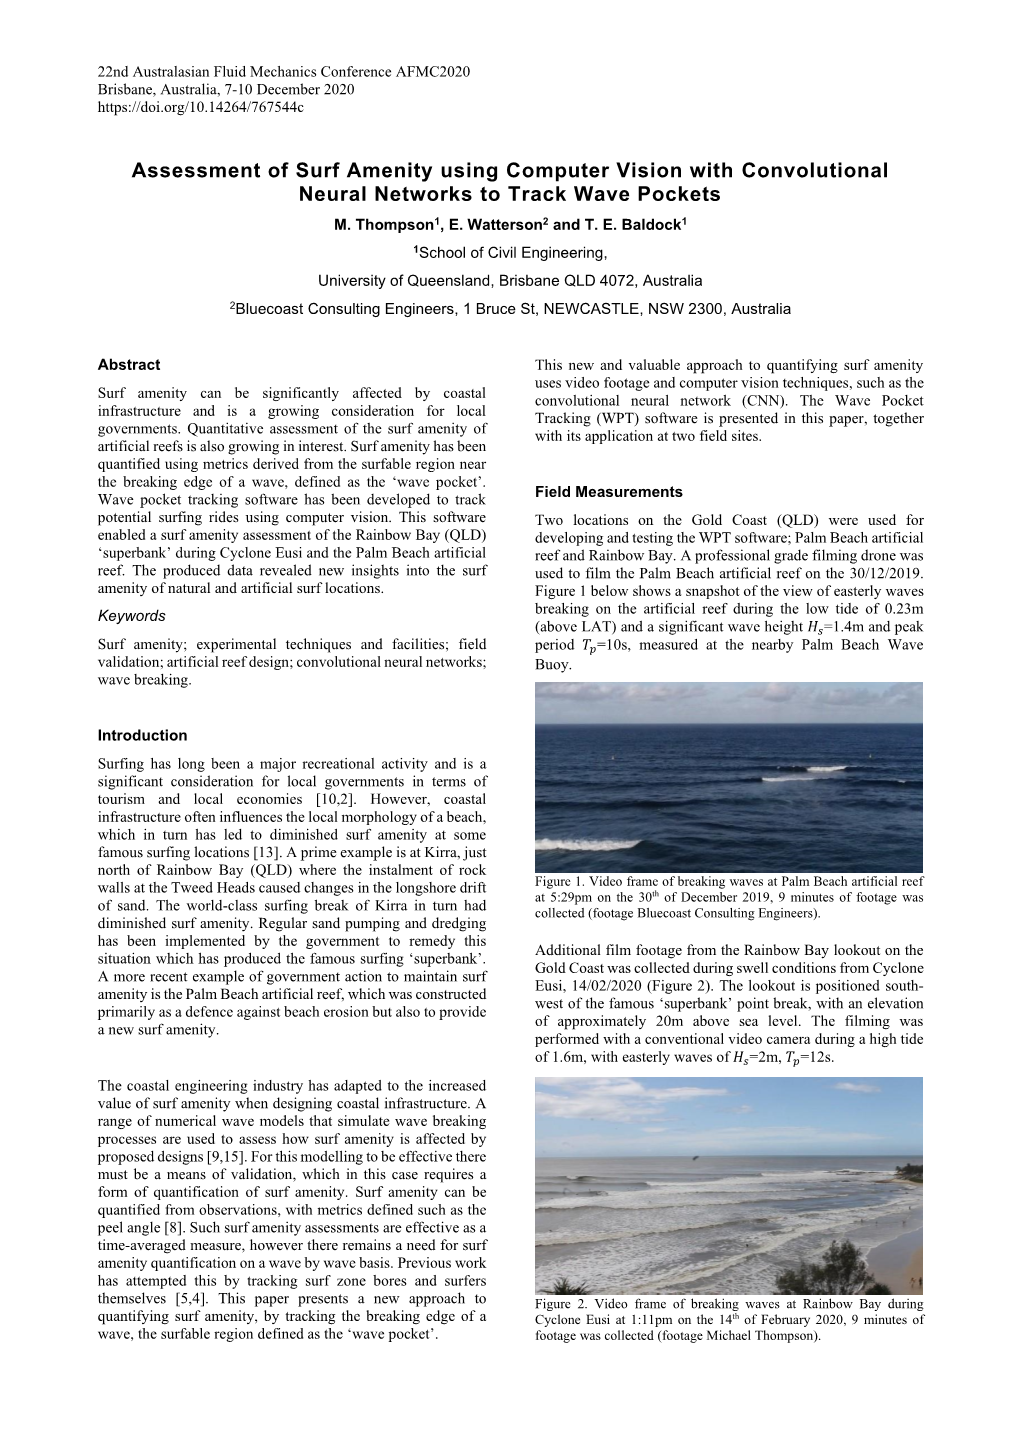 Assessment of Surf Amenity Using Computer Vision with Convolutional Neural Networks to Track Wave Pockets M